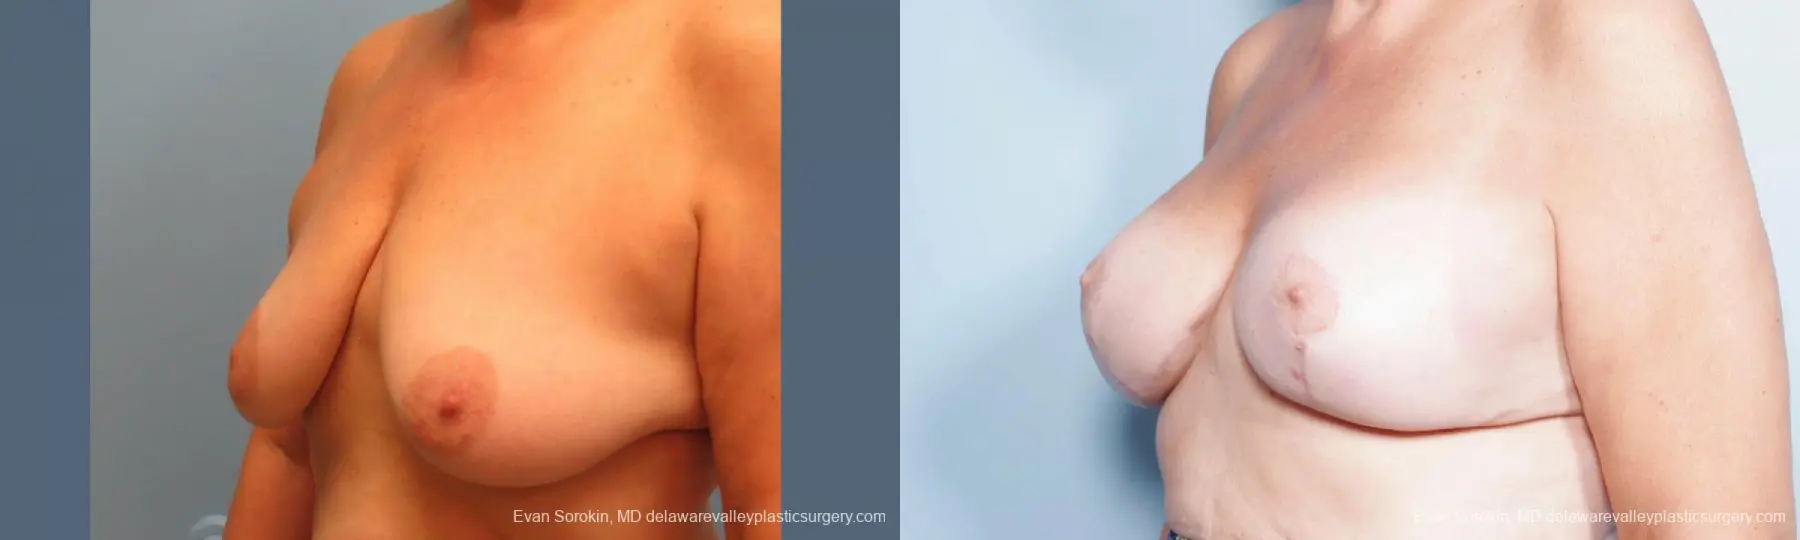 Philadelphia Breast Lift and Augmentation 9431 - Before and After 4